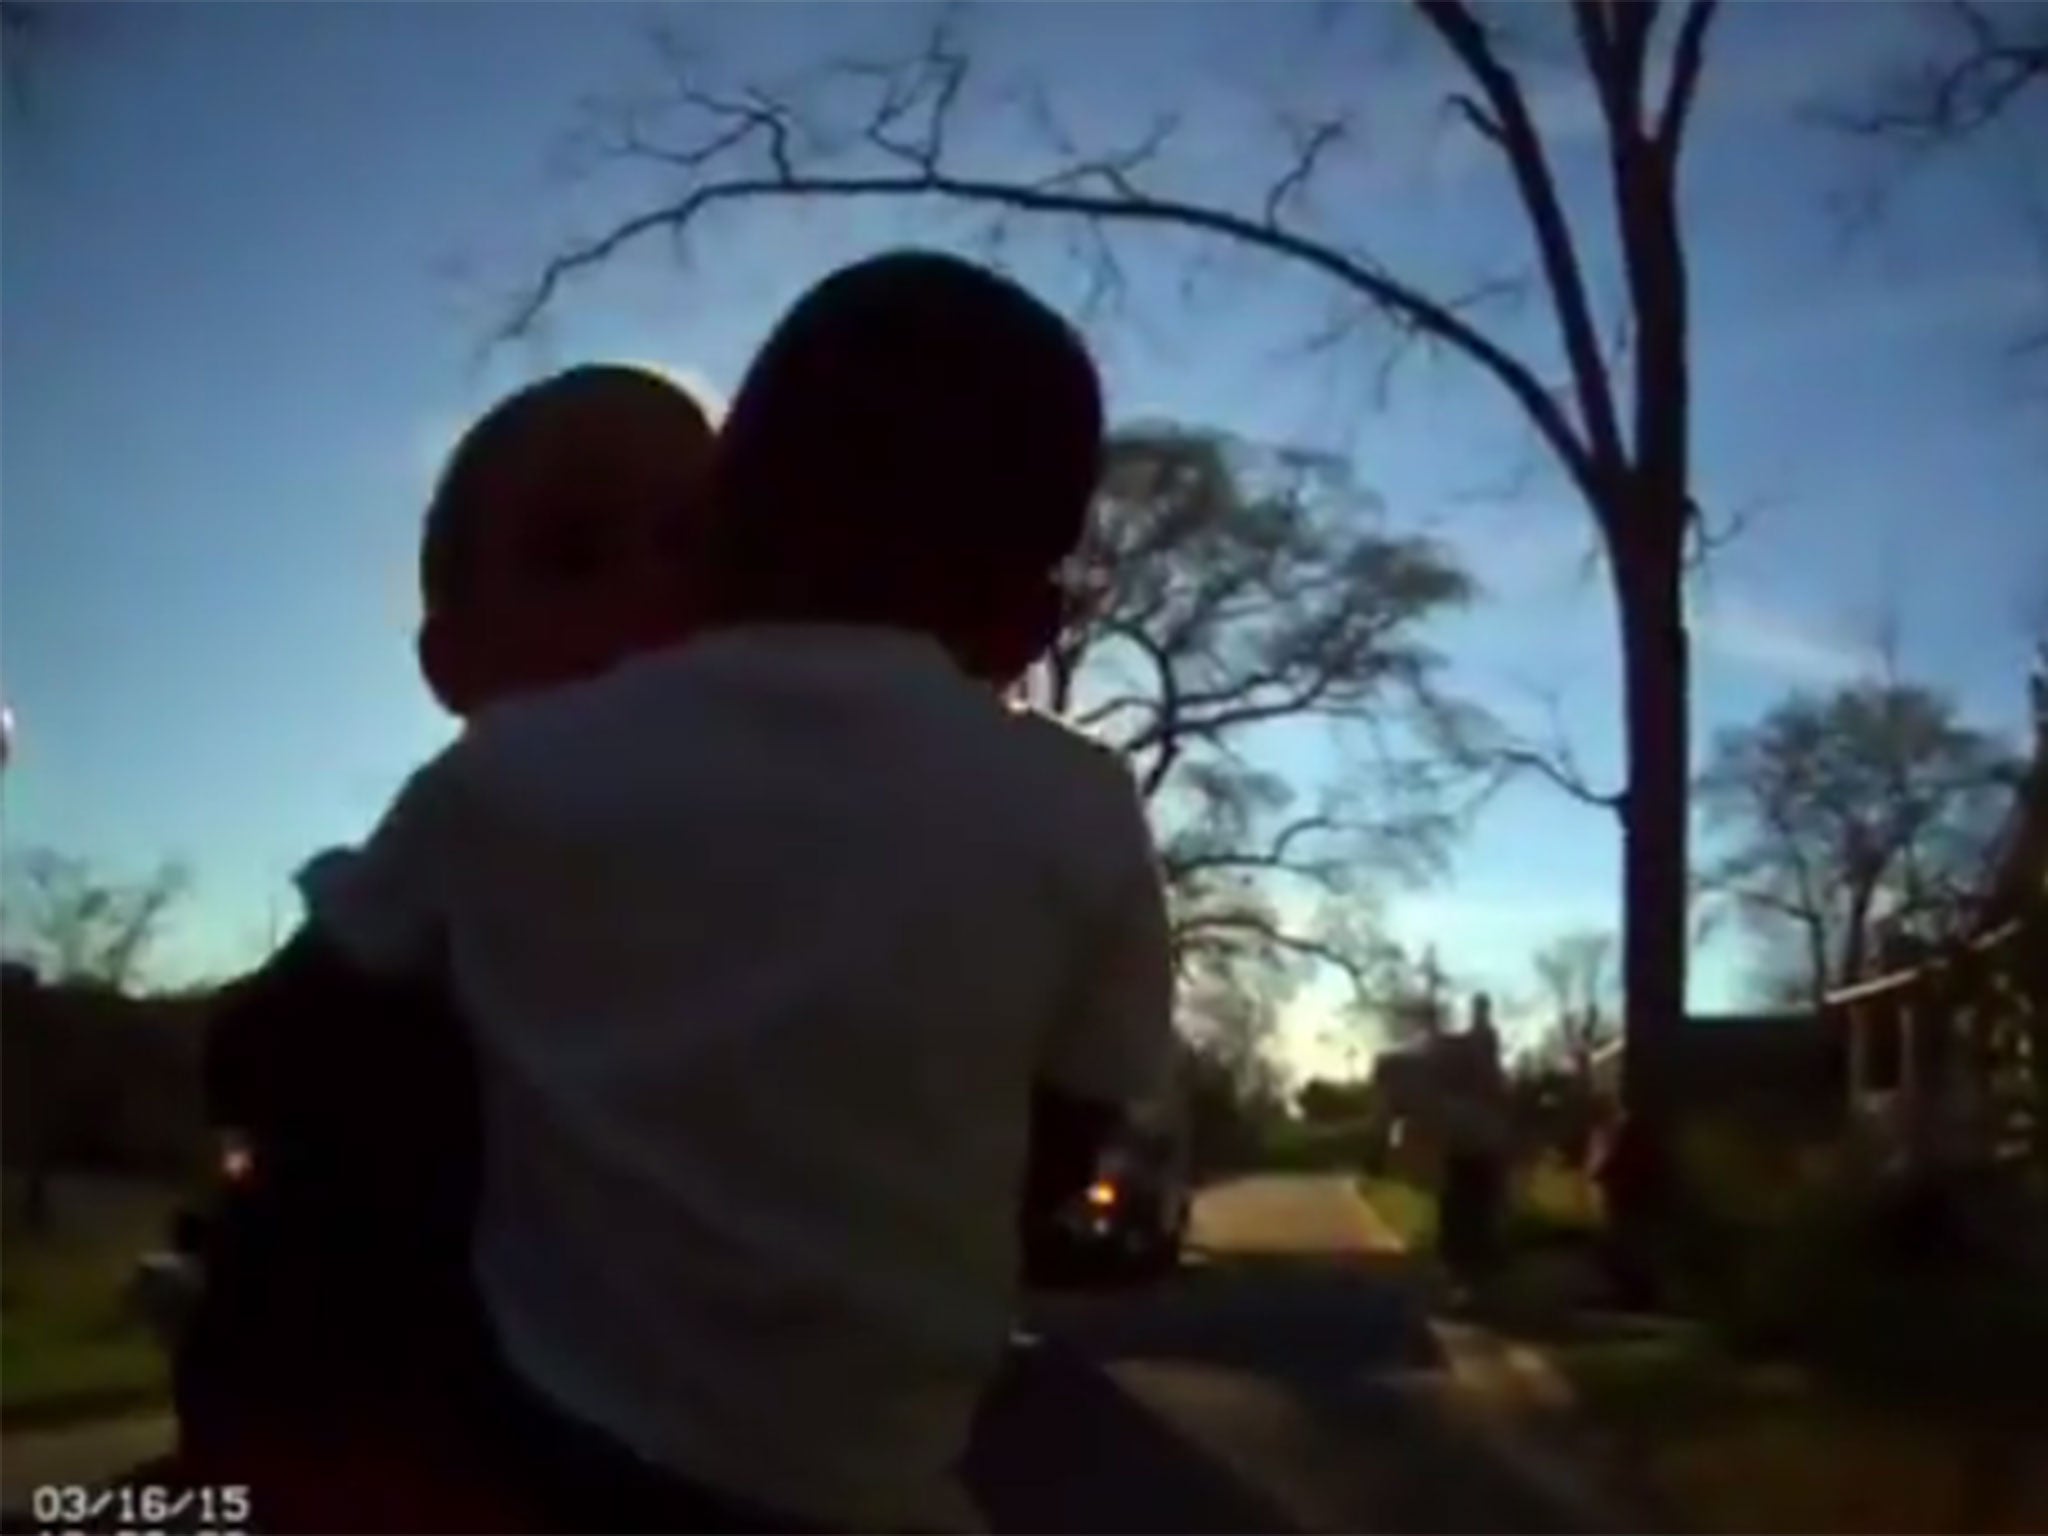 Officer Hudson carrying the boy from the burning house